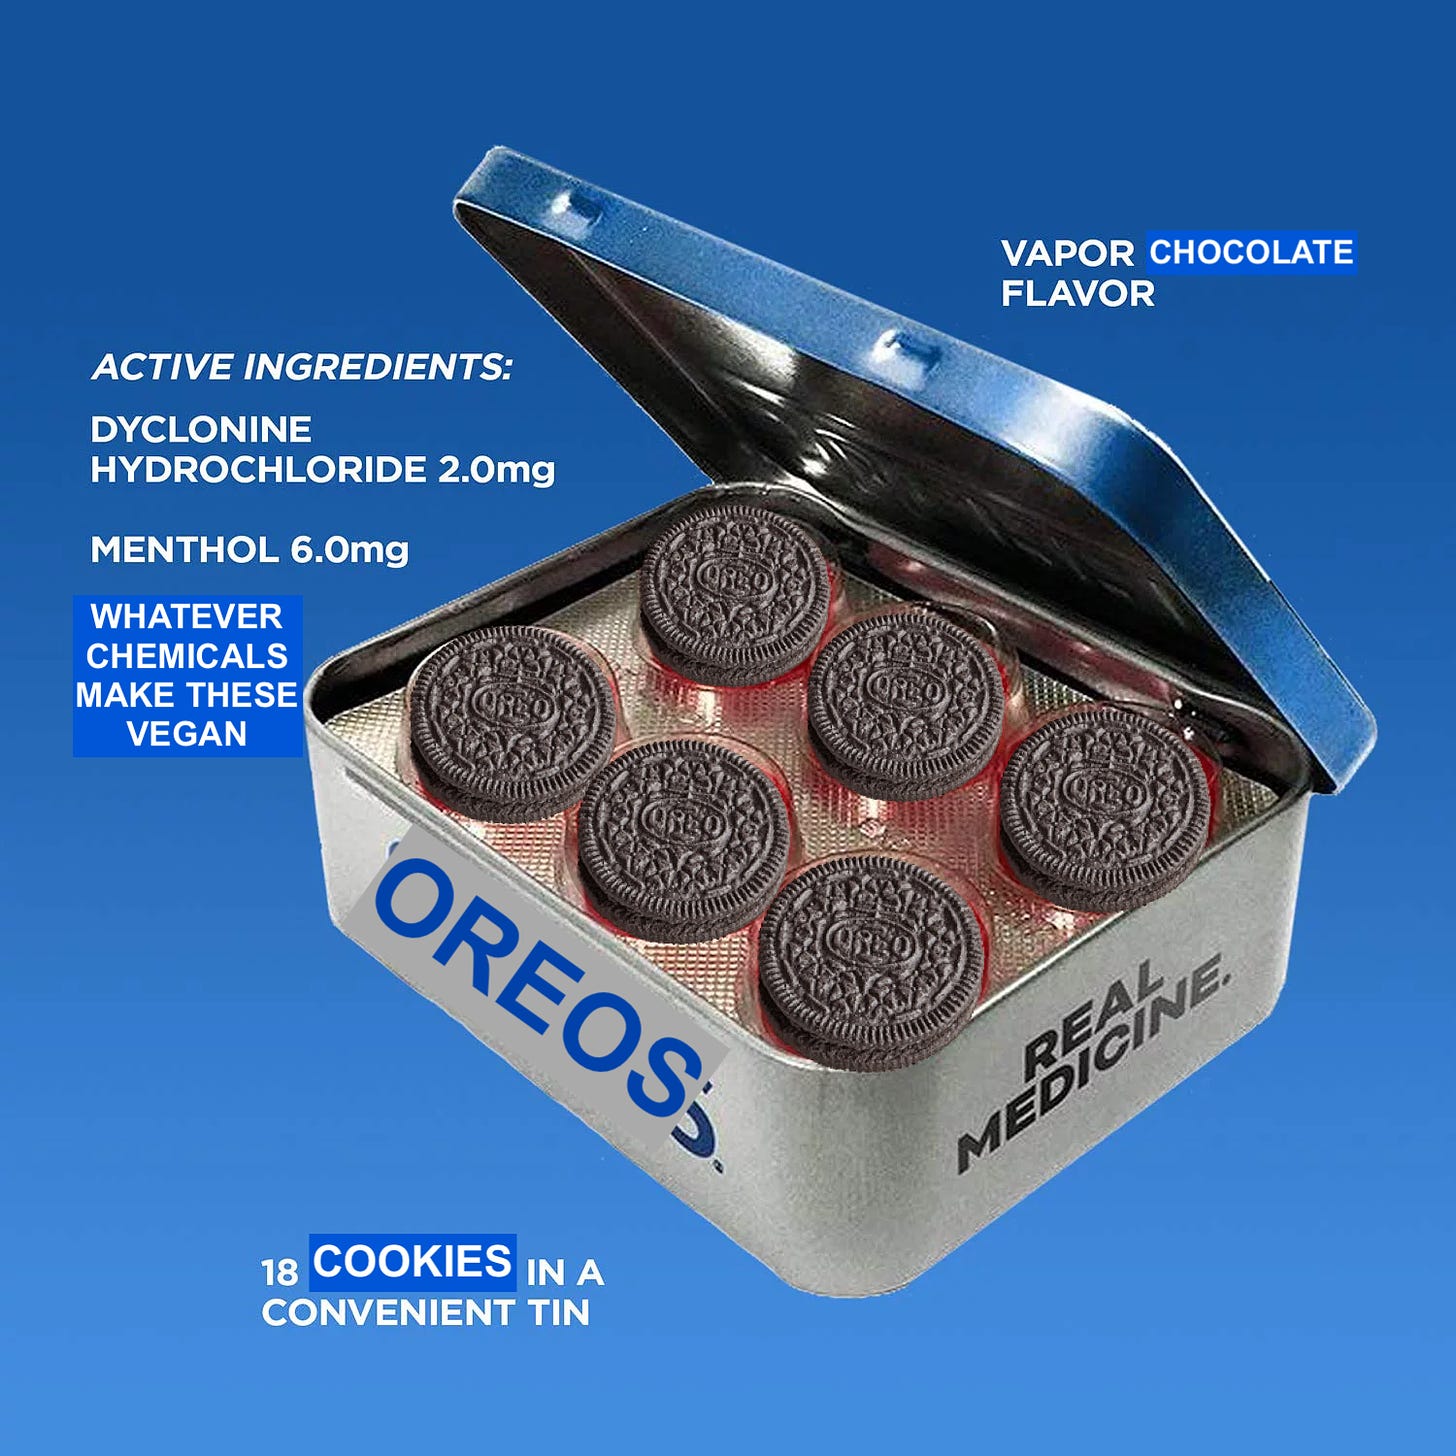 The aforementioned ad for sucrets, only the sucrets are now oreos, and the flavor reads "VAPOR CHOCOLATE FLAVOR". Under Active Ingredients, it now additionally says "Whatever chemicals make these vegan"